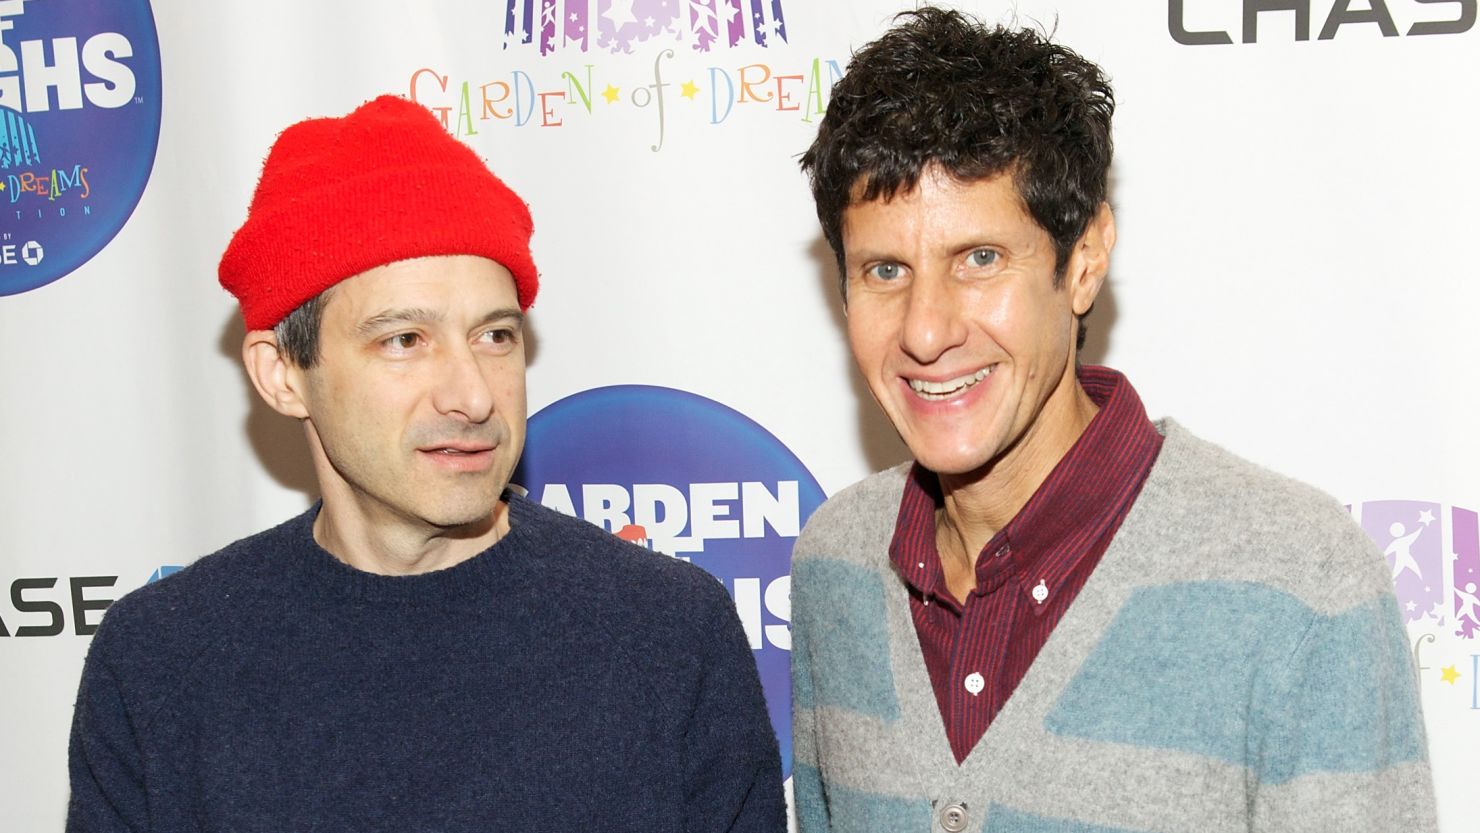 Surviving Beastie Boys members Ad-Rock and Mike D are planning to release a memoir in 2015.